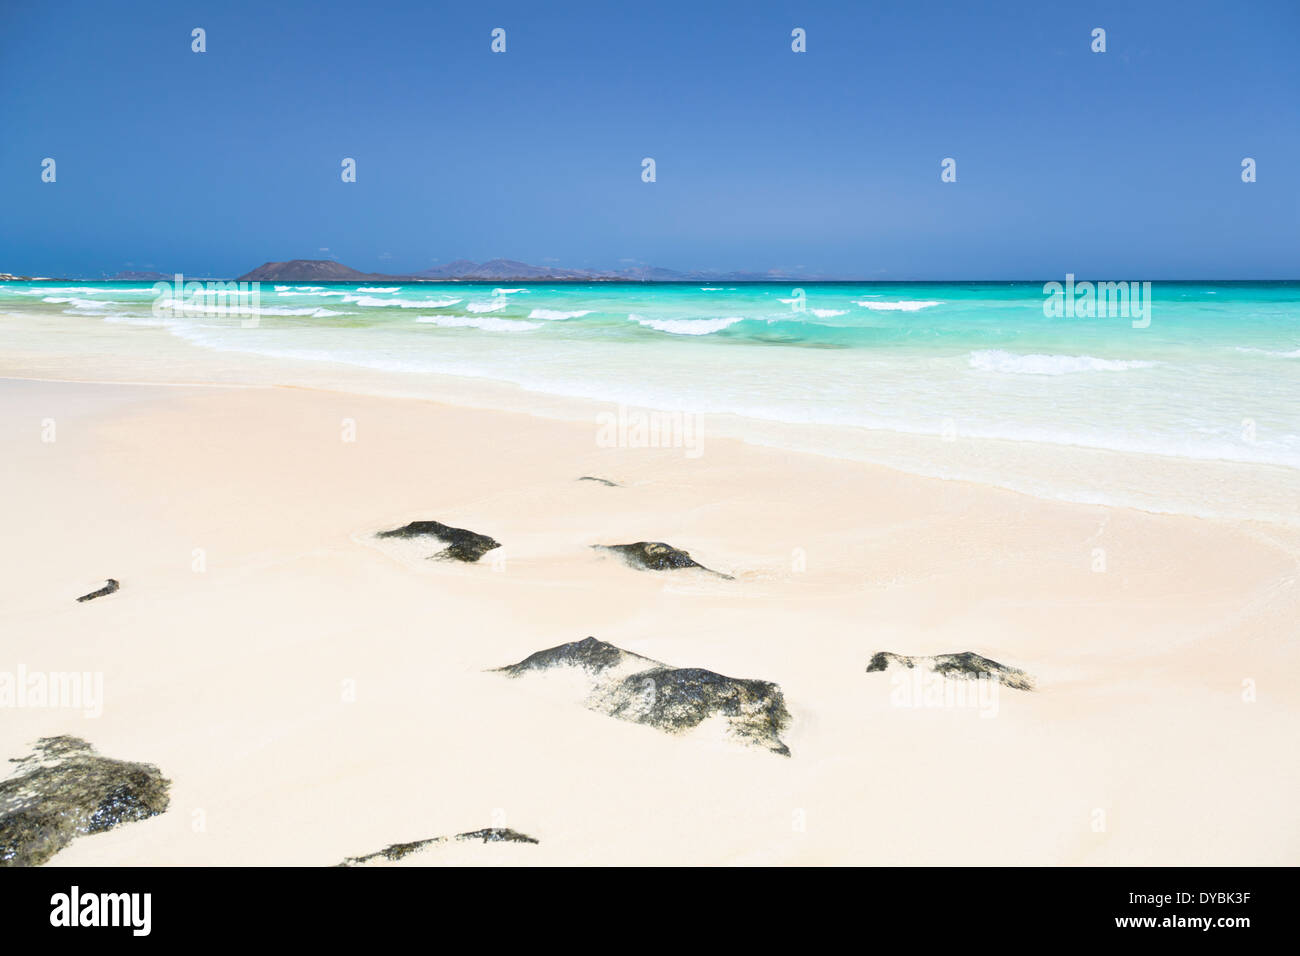 Playa de las Dunas de Corralejo in Fuerteventura, a perfect white beach with turquoise water and blue sky. Stock Photo